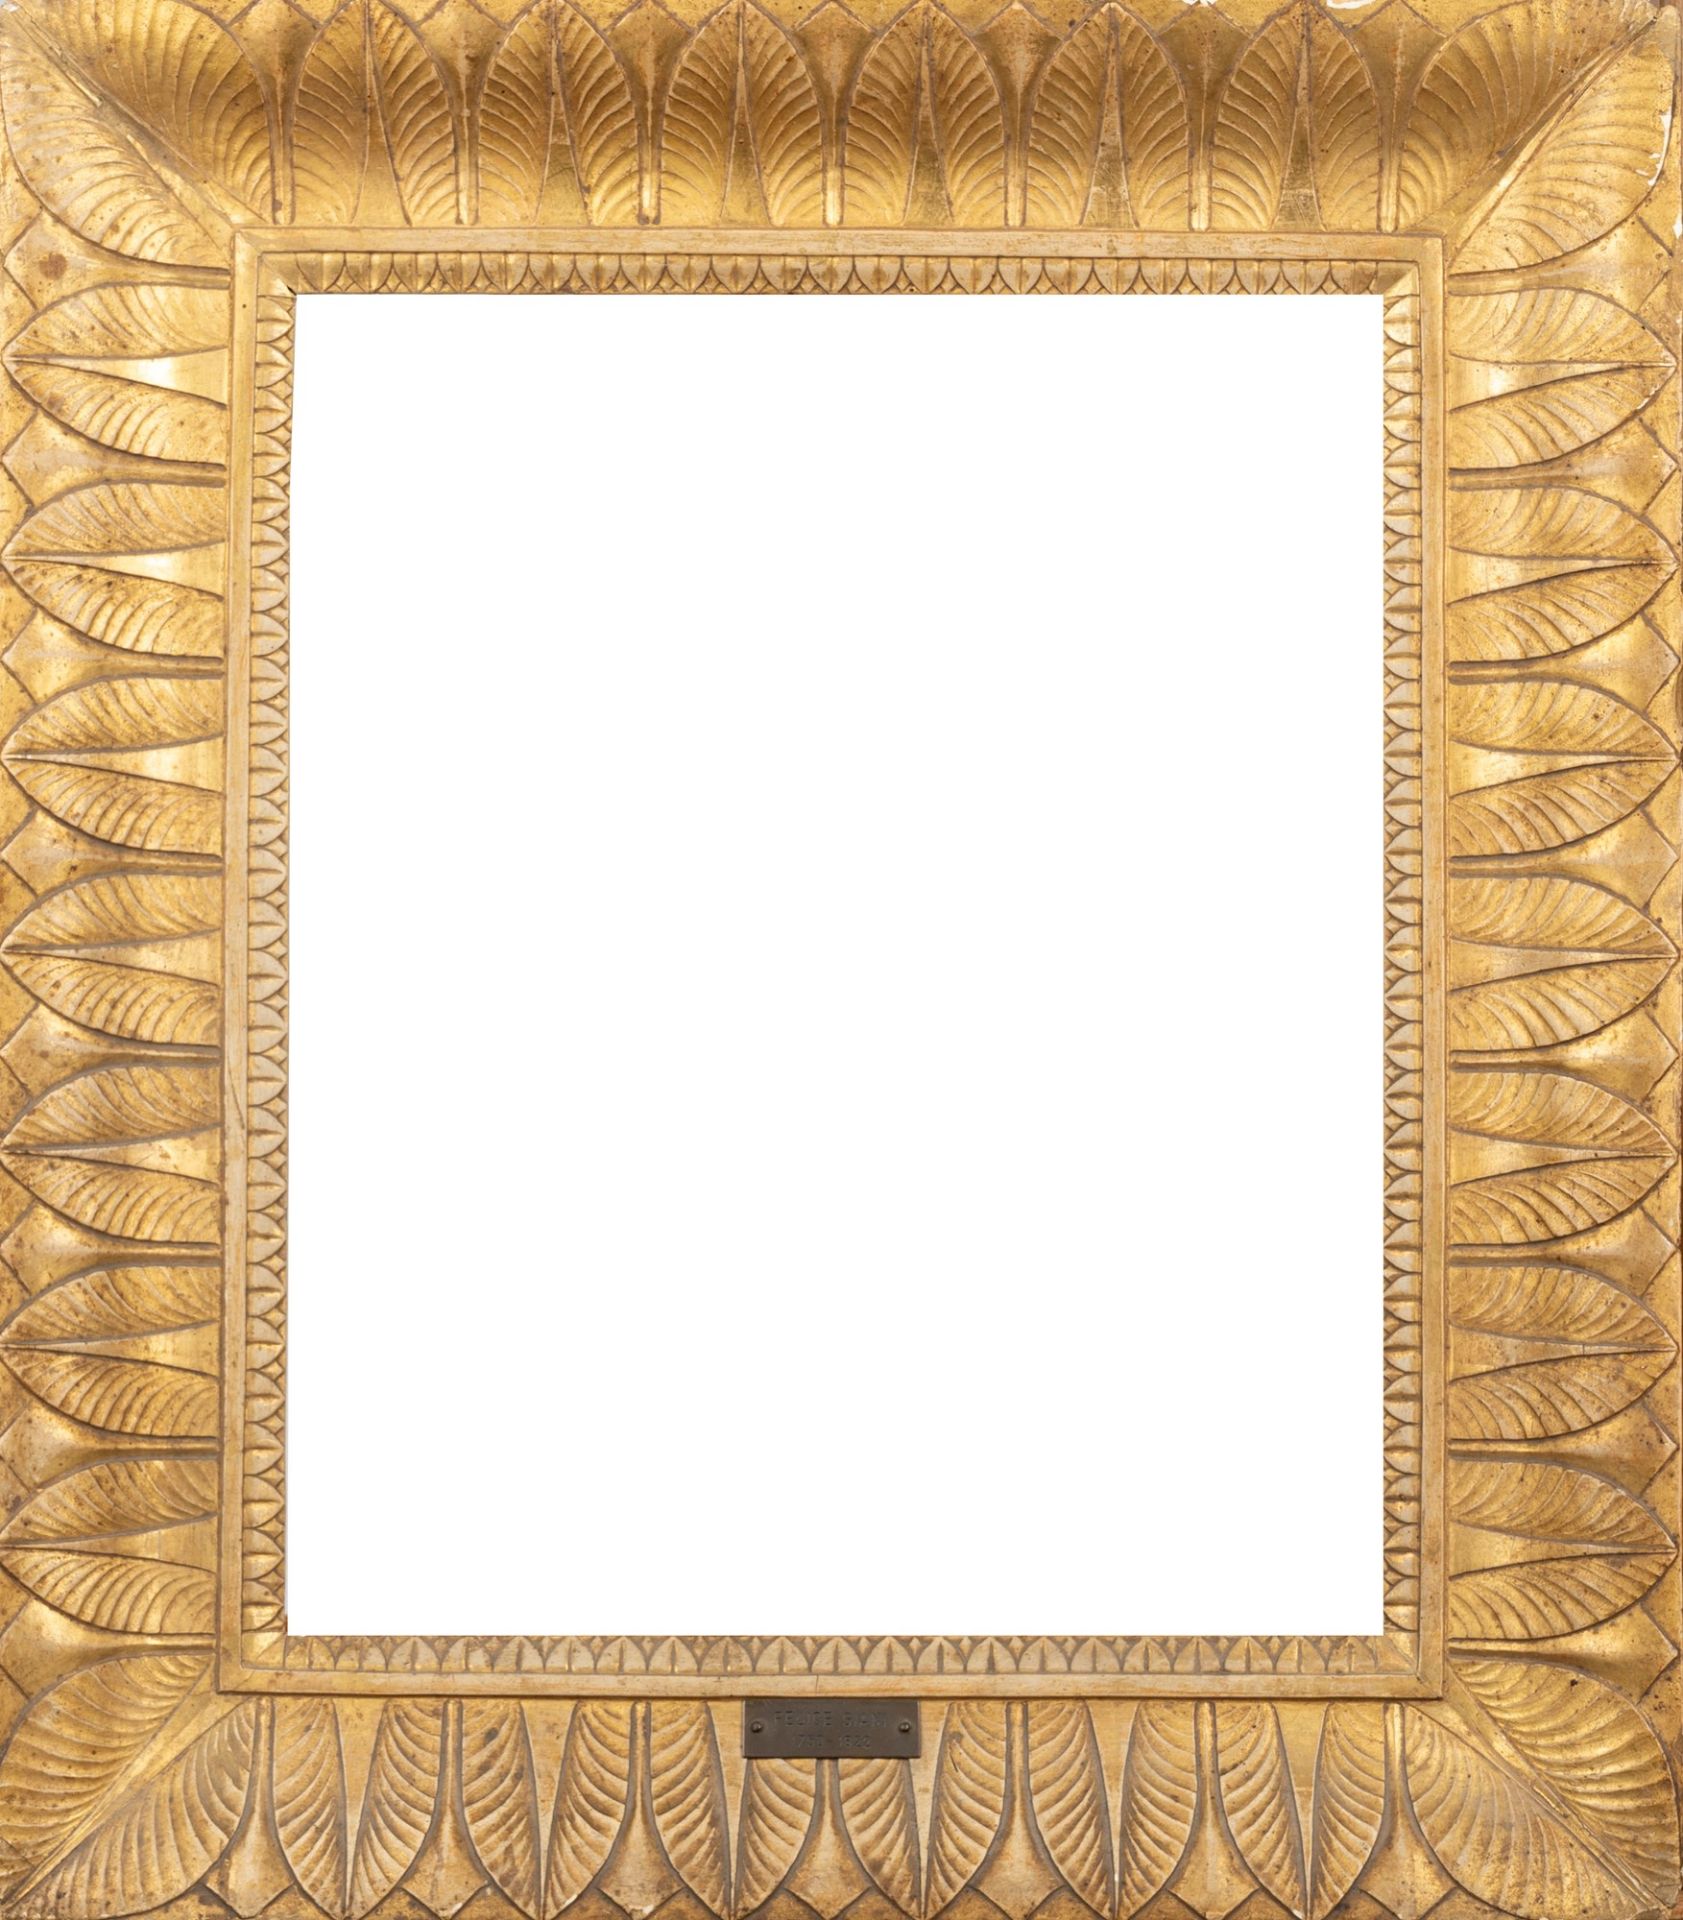 Gilded wood glovebox frame, decorated with palmettes, 19th century